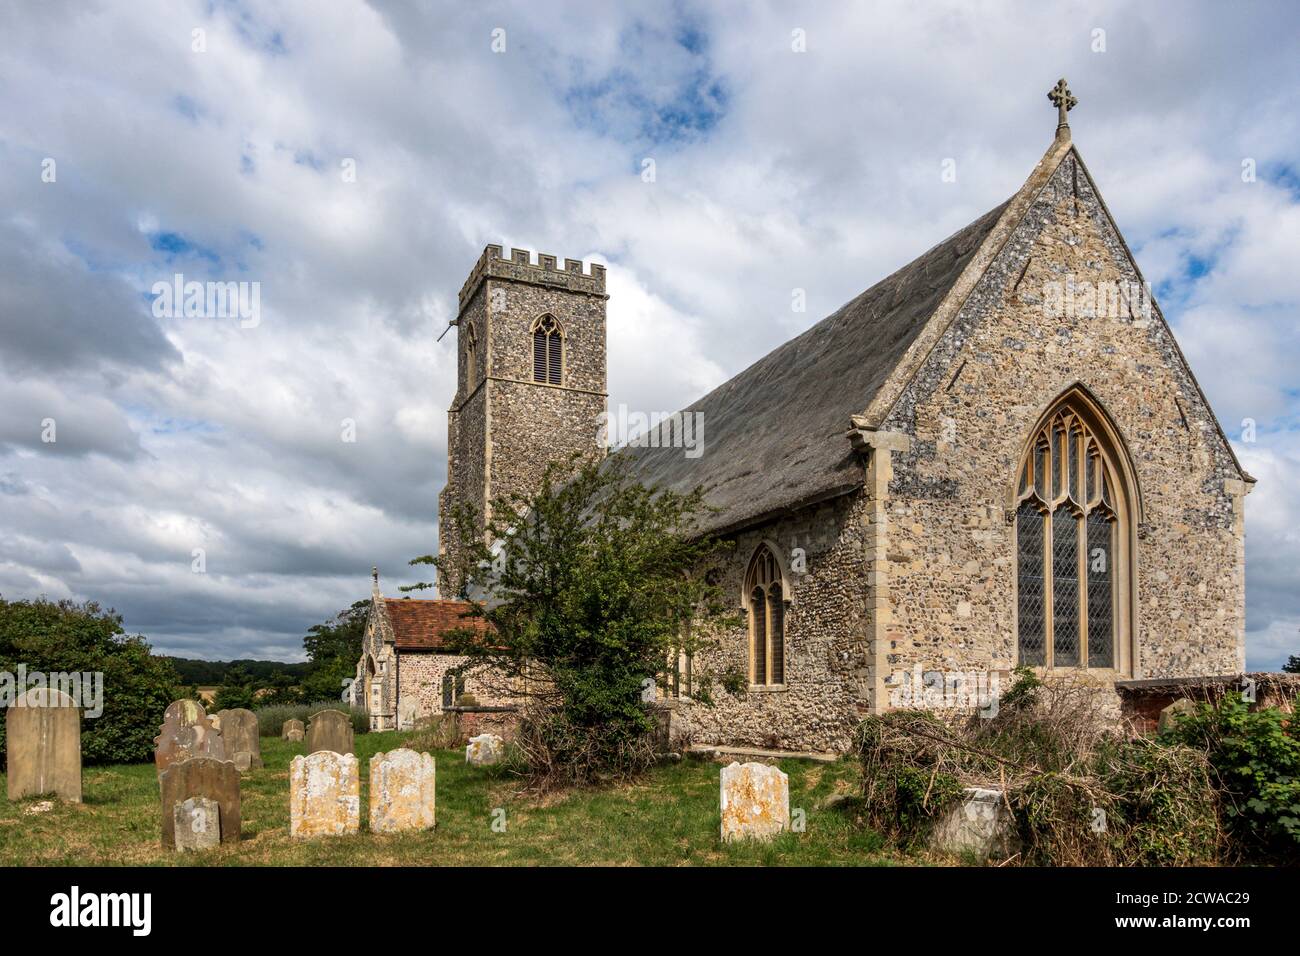 The church of St. Mary, Henstead, Suffolk, Uk. Stock Photo